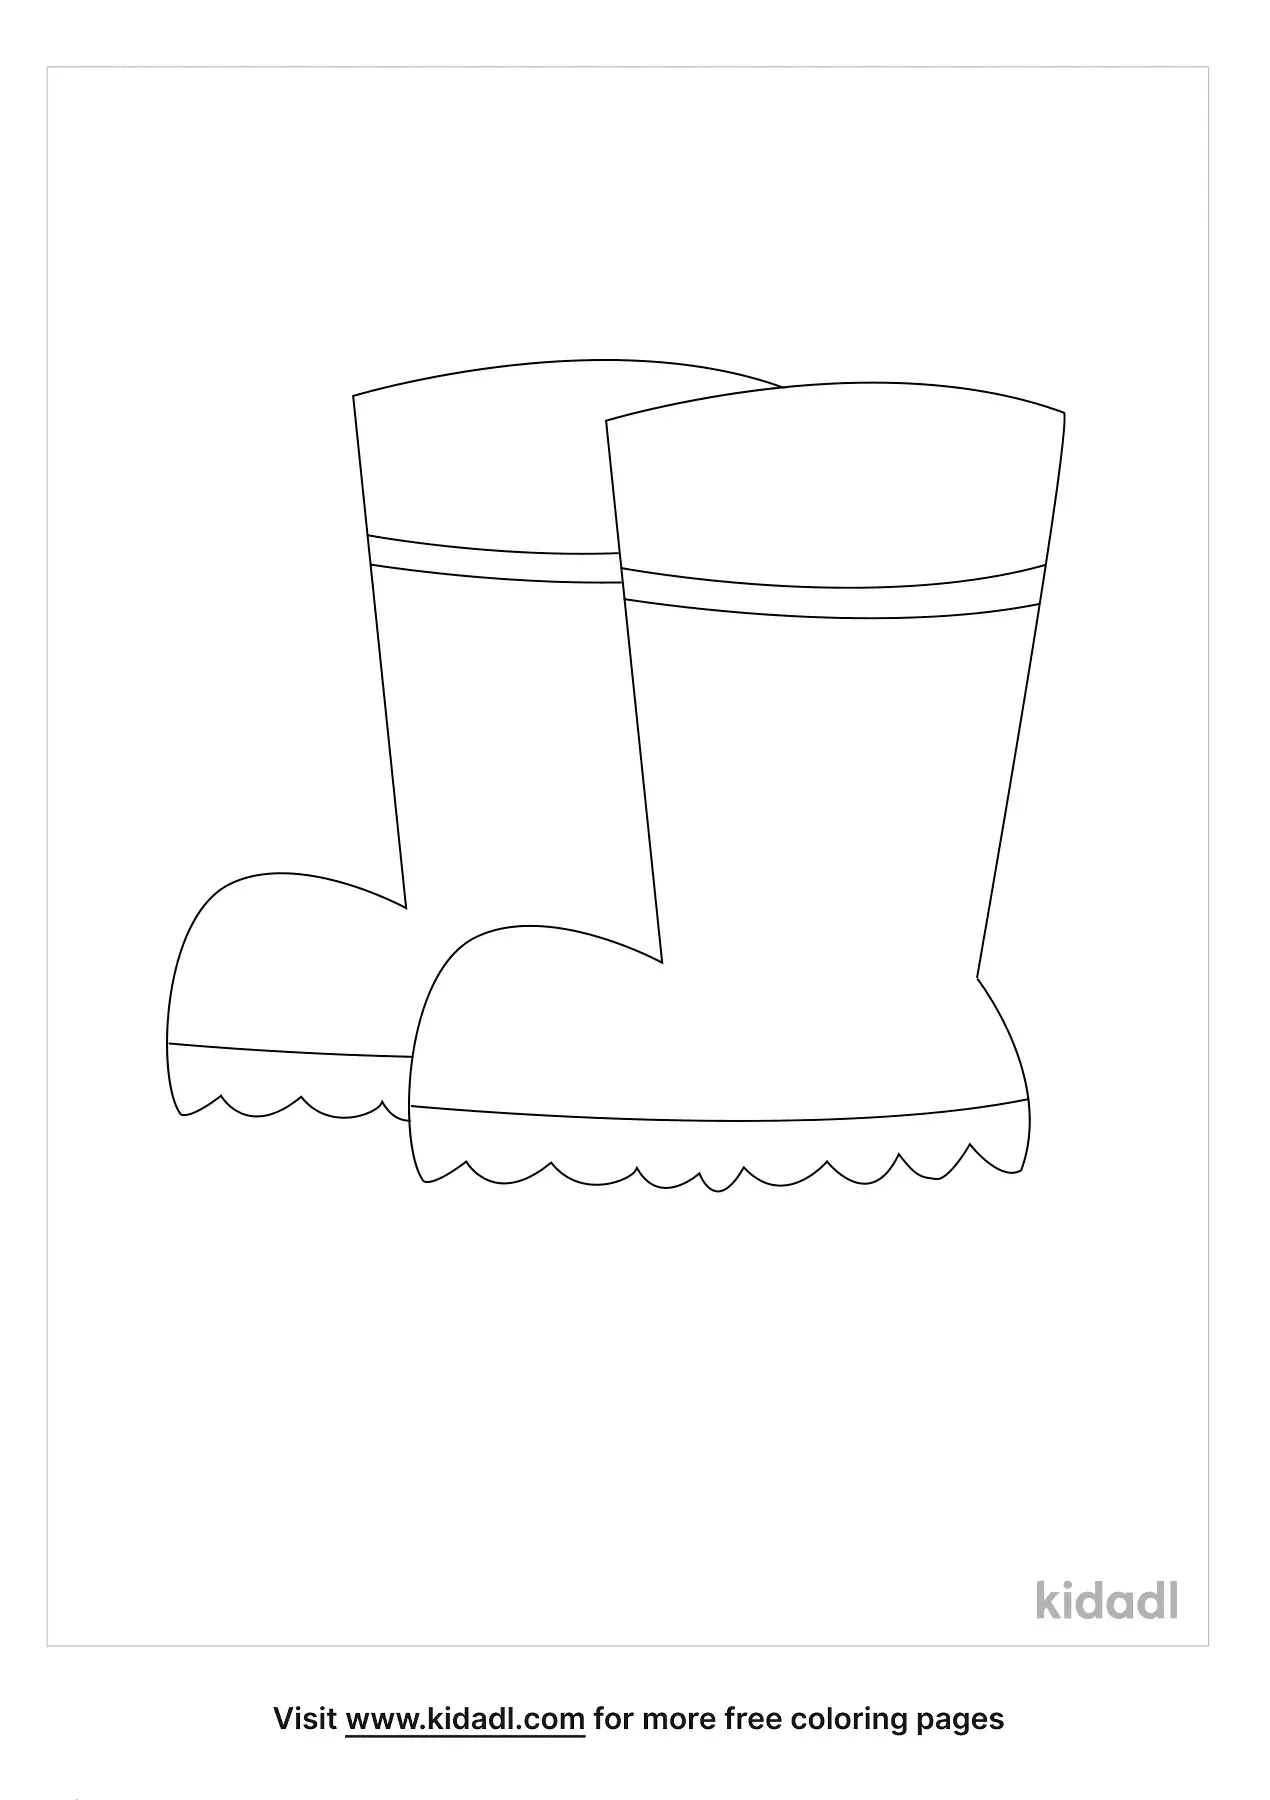 Free Gardening Boots Coloring Page | Coloring Page Printables | Kidadl